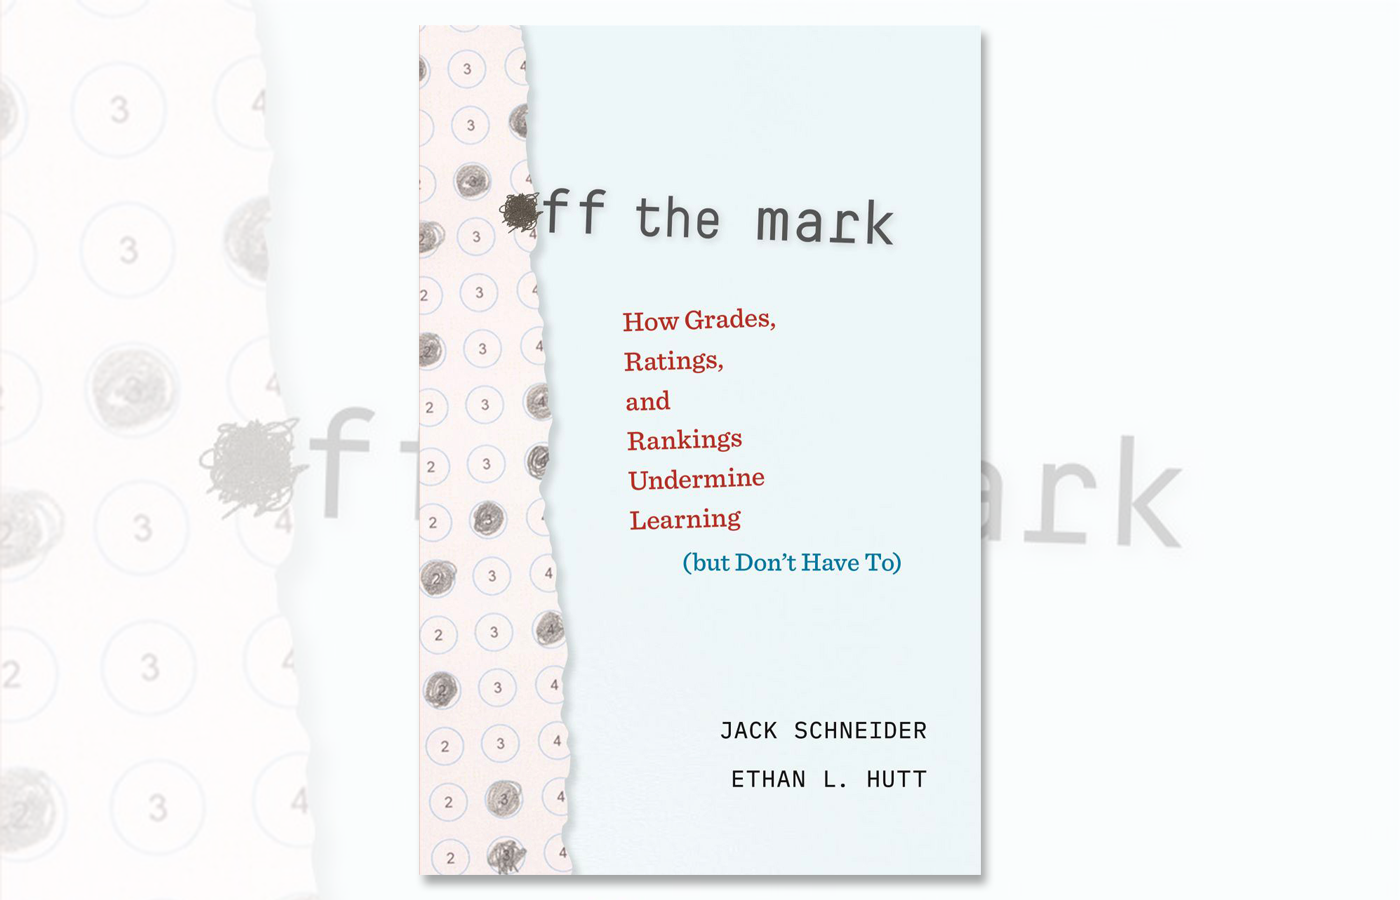 Cover of "Off the Mark" by Jack Schneider and Ethan L. Hutt